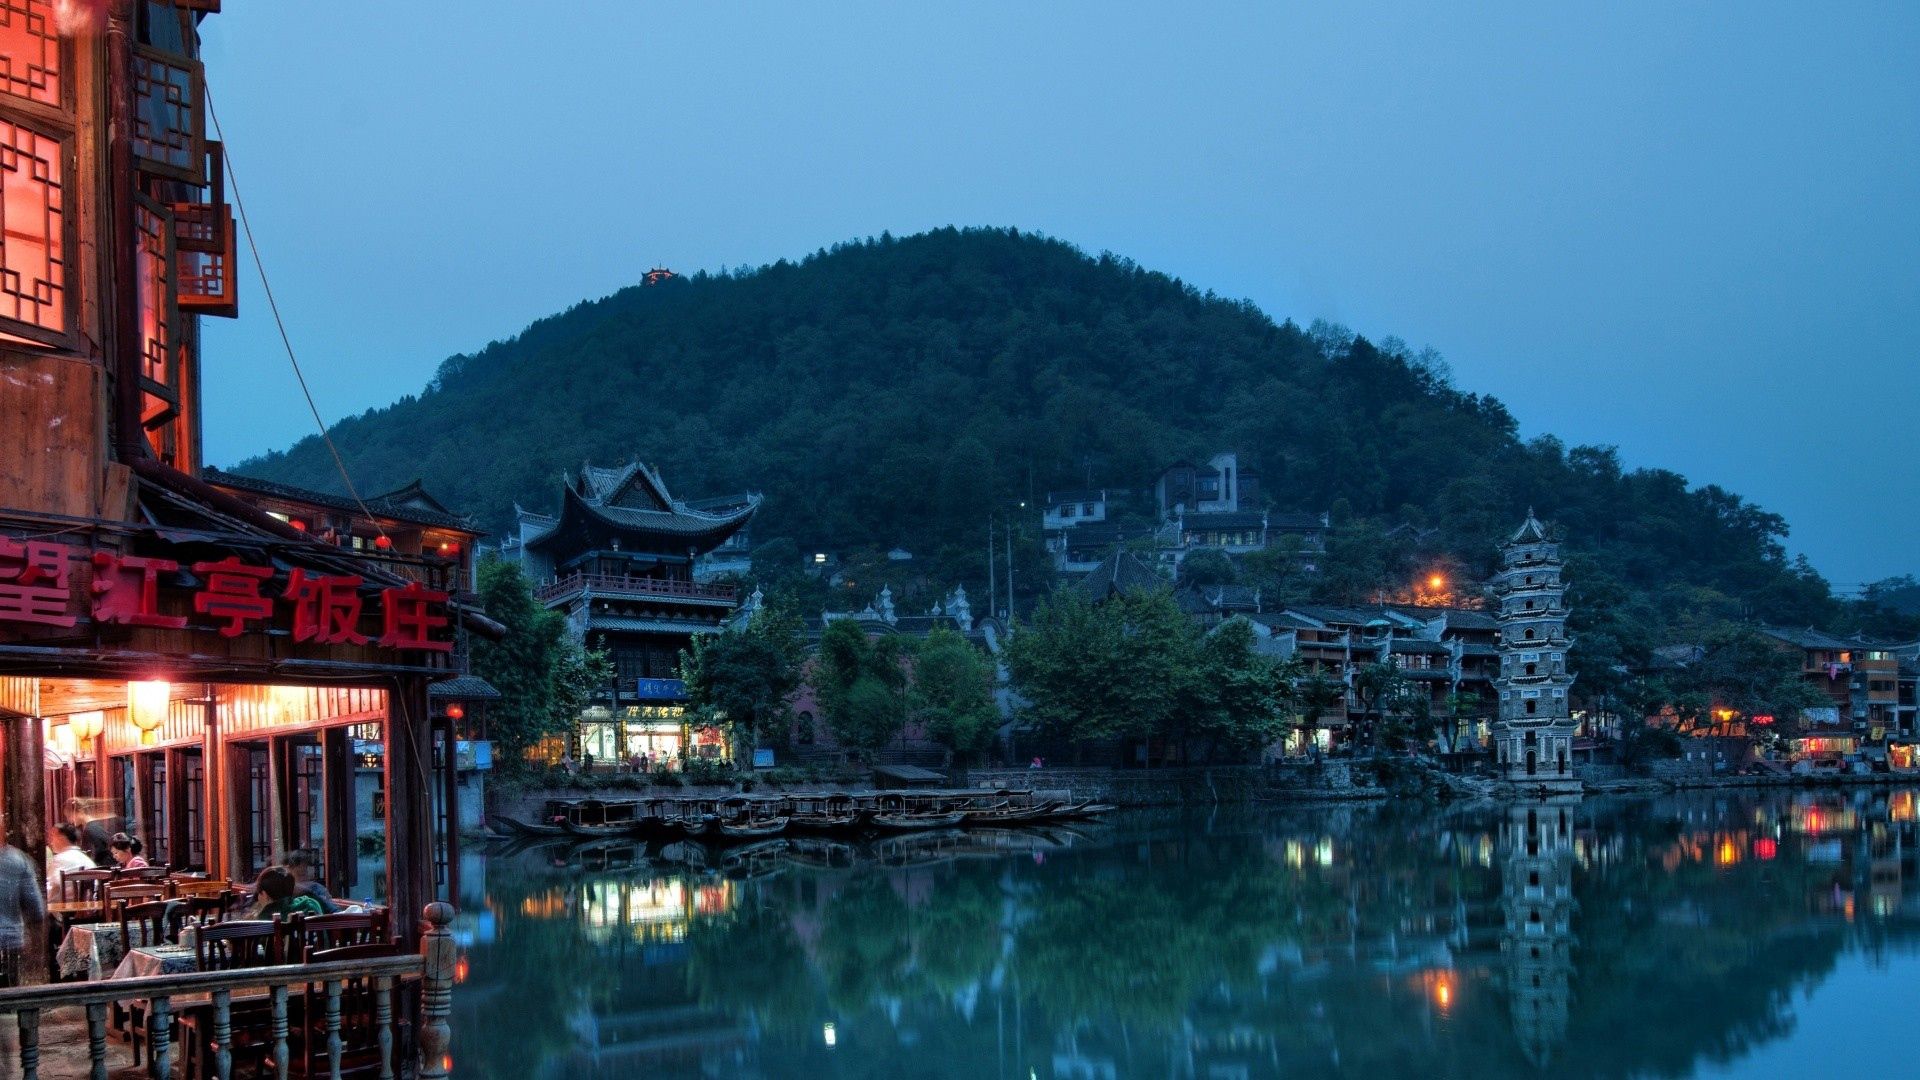 Download wallpaper 1920x1080 china, buildings, trees, night HD background